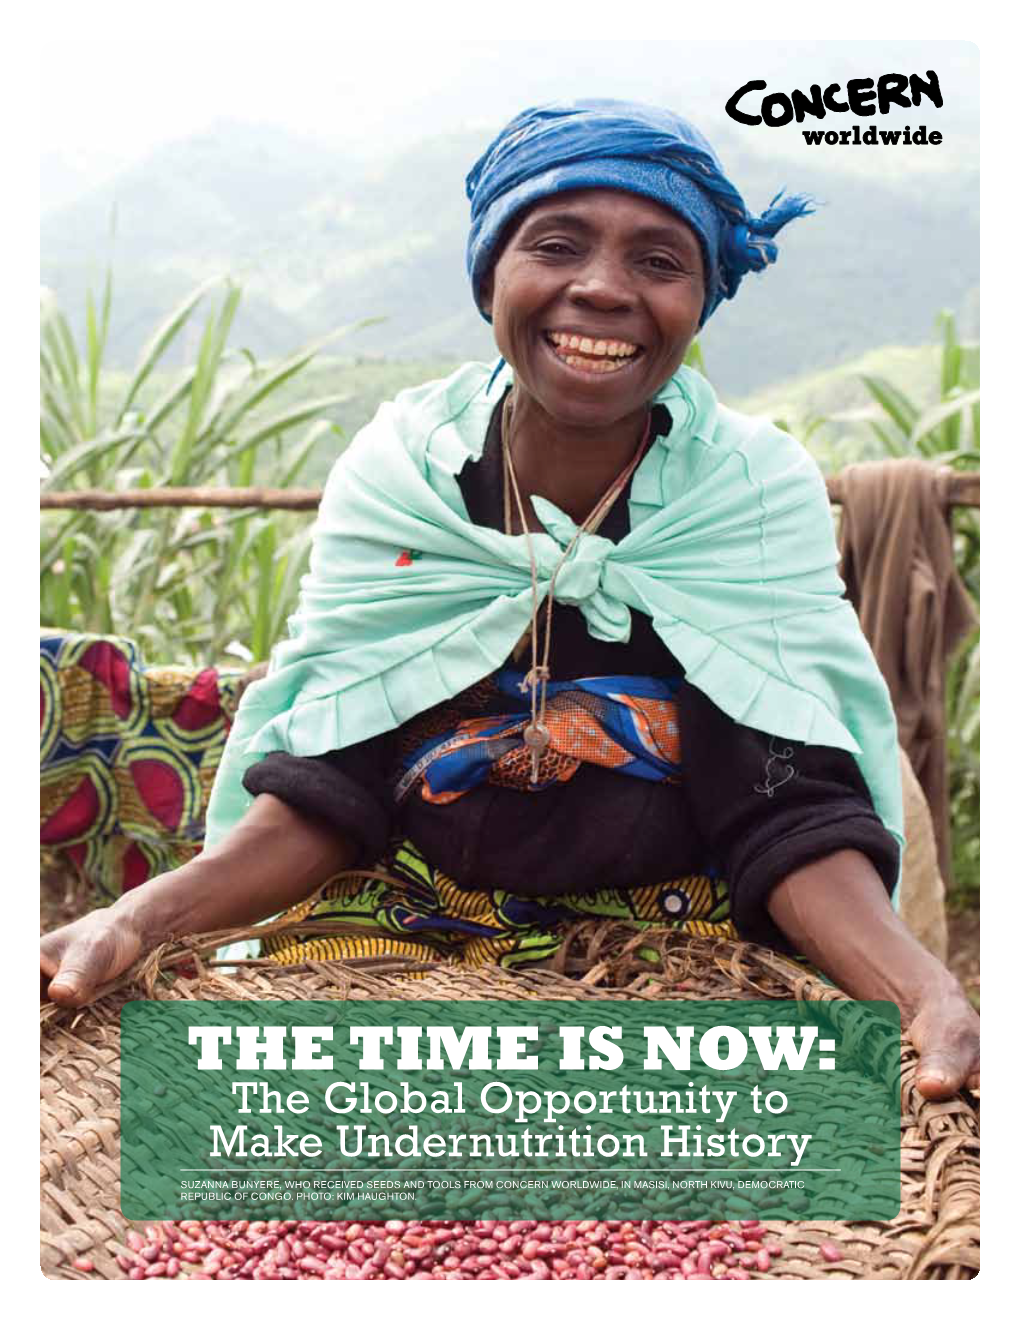 The Time Is Now: the Global Opportunity to Make Undernutrition History